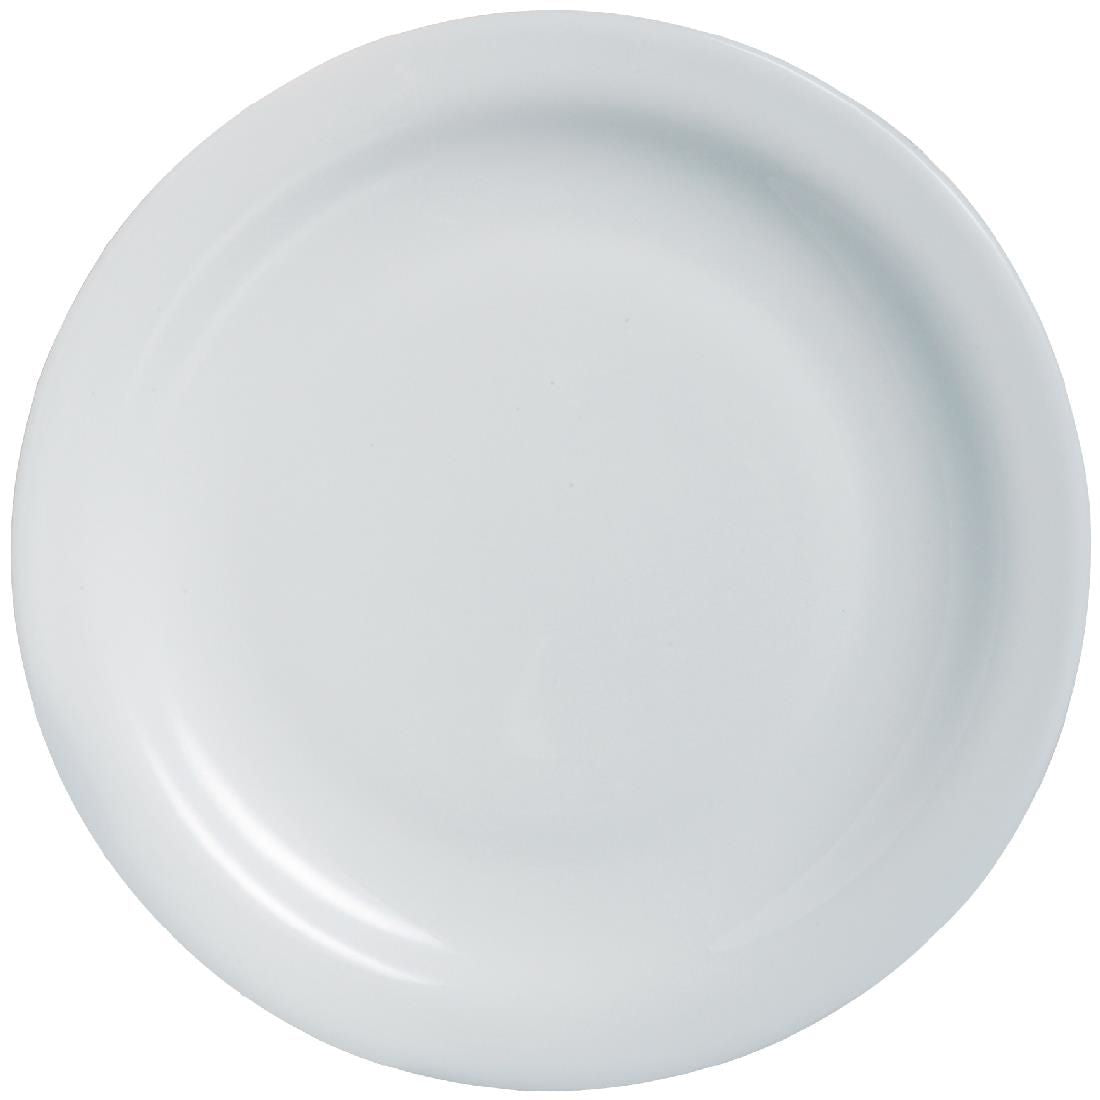 DP061 Arcoroc Opal Hoteliere Narrow Rim Plates 236mm (Pack of 6) JD Catering Equipment Solutions Ltd